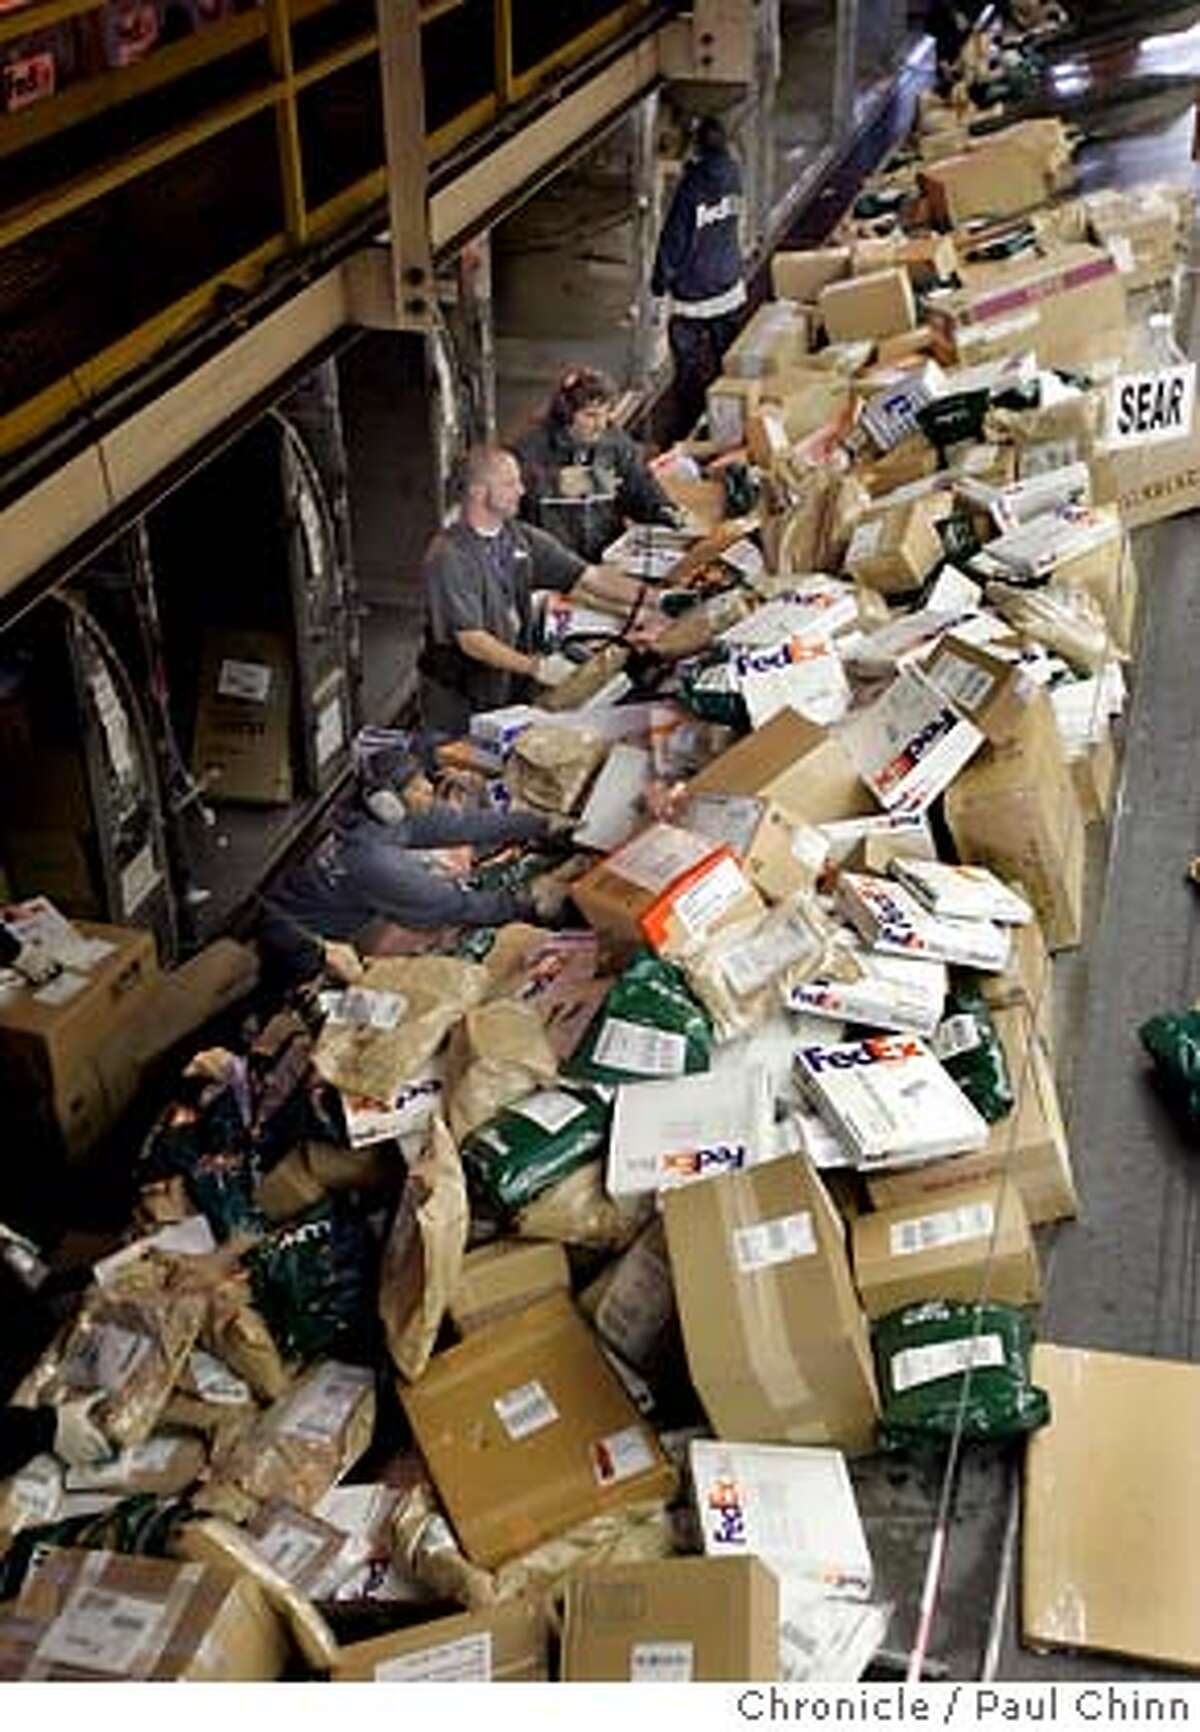 fedex21_084_pc.jpg Sorters wade through a mountain of parcels. The Federal Express sorting facility at Oakland International Airport on 12/17/04 in Oakland, CA. PAUL CHINN/The Chronicle MANDATORY CREDIT FOR PHOTOG AND S.F. CHRONICLE/ - MAGS OUT